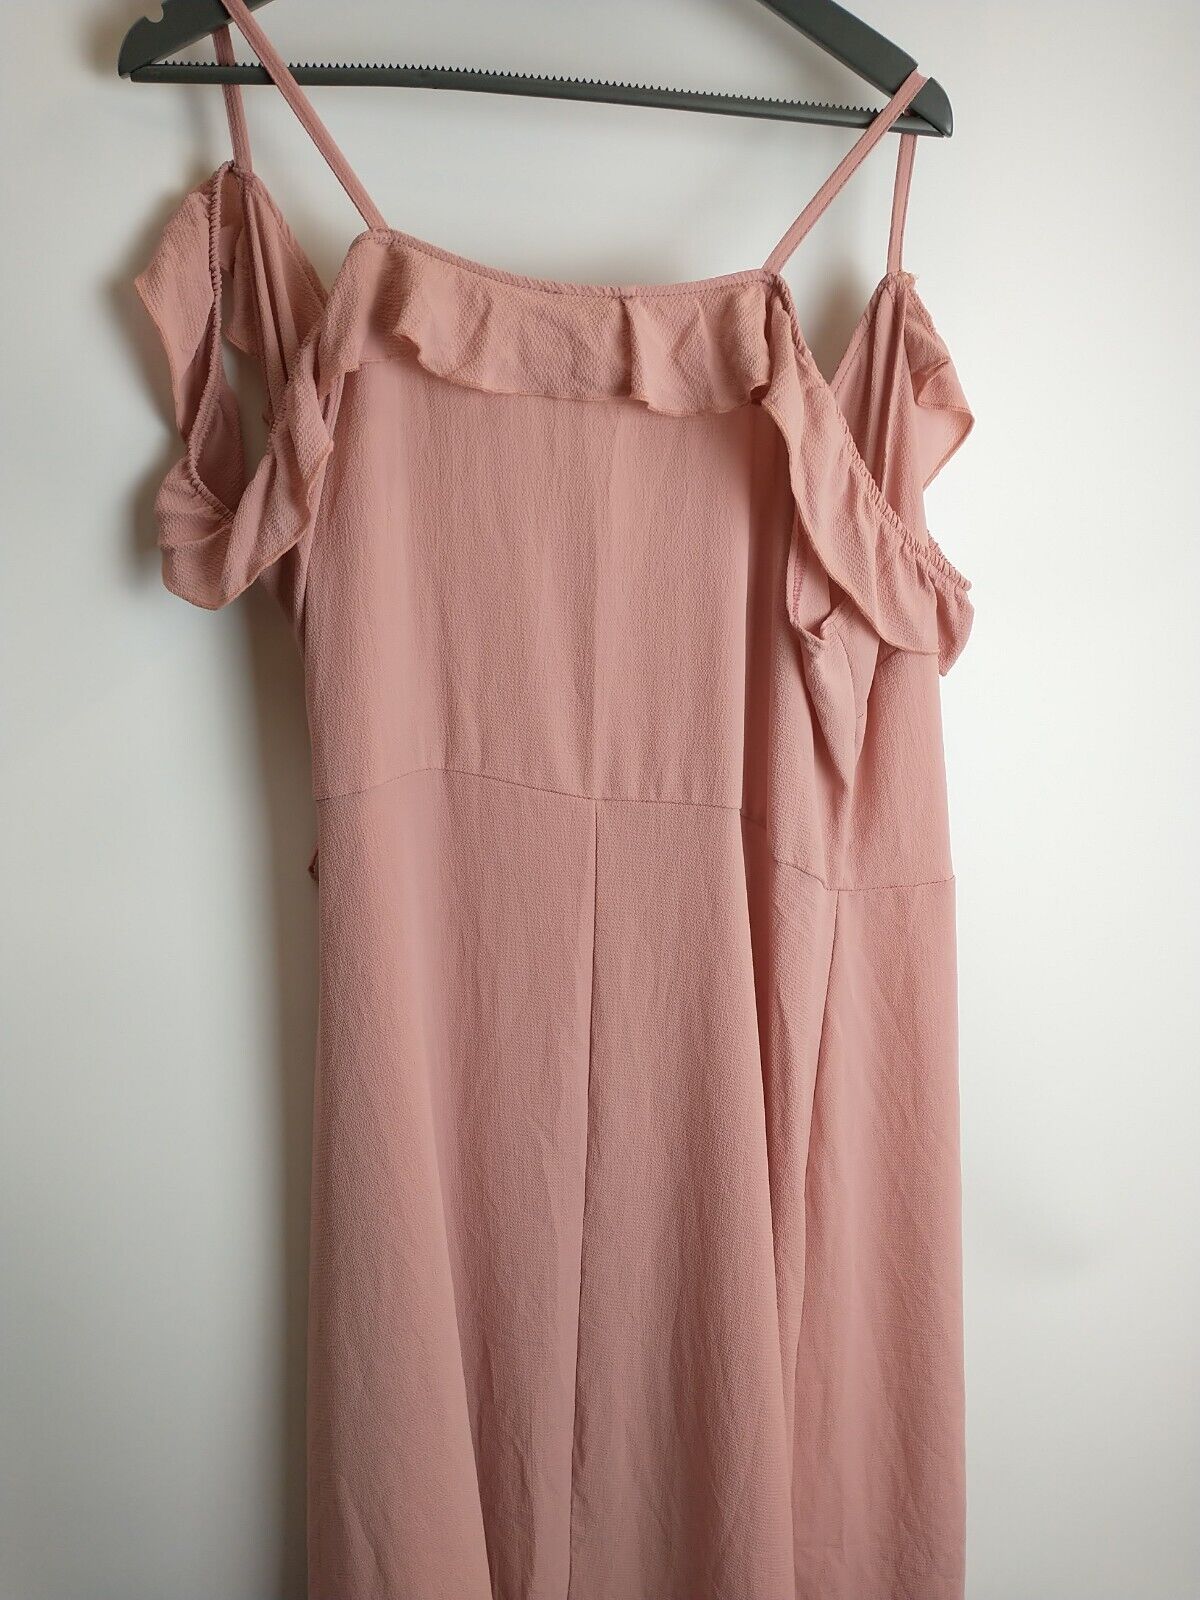 Yours Ruffle Wrap Cold Shoulder Pink Maxi Dress Size 20 **** V112